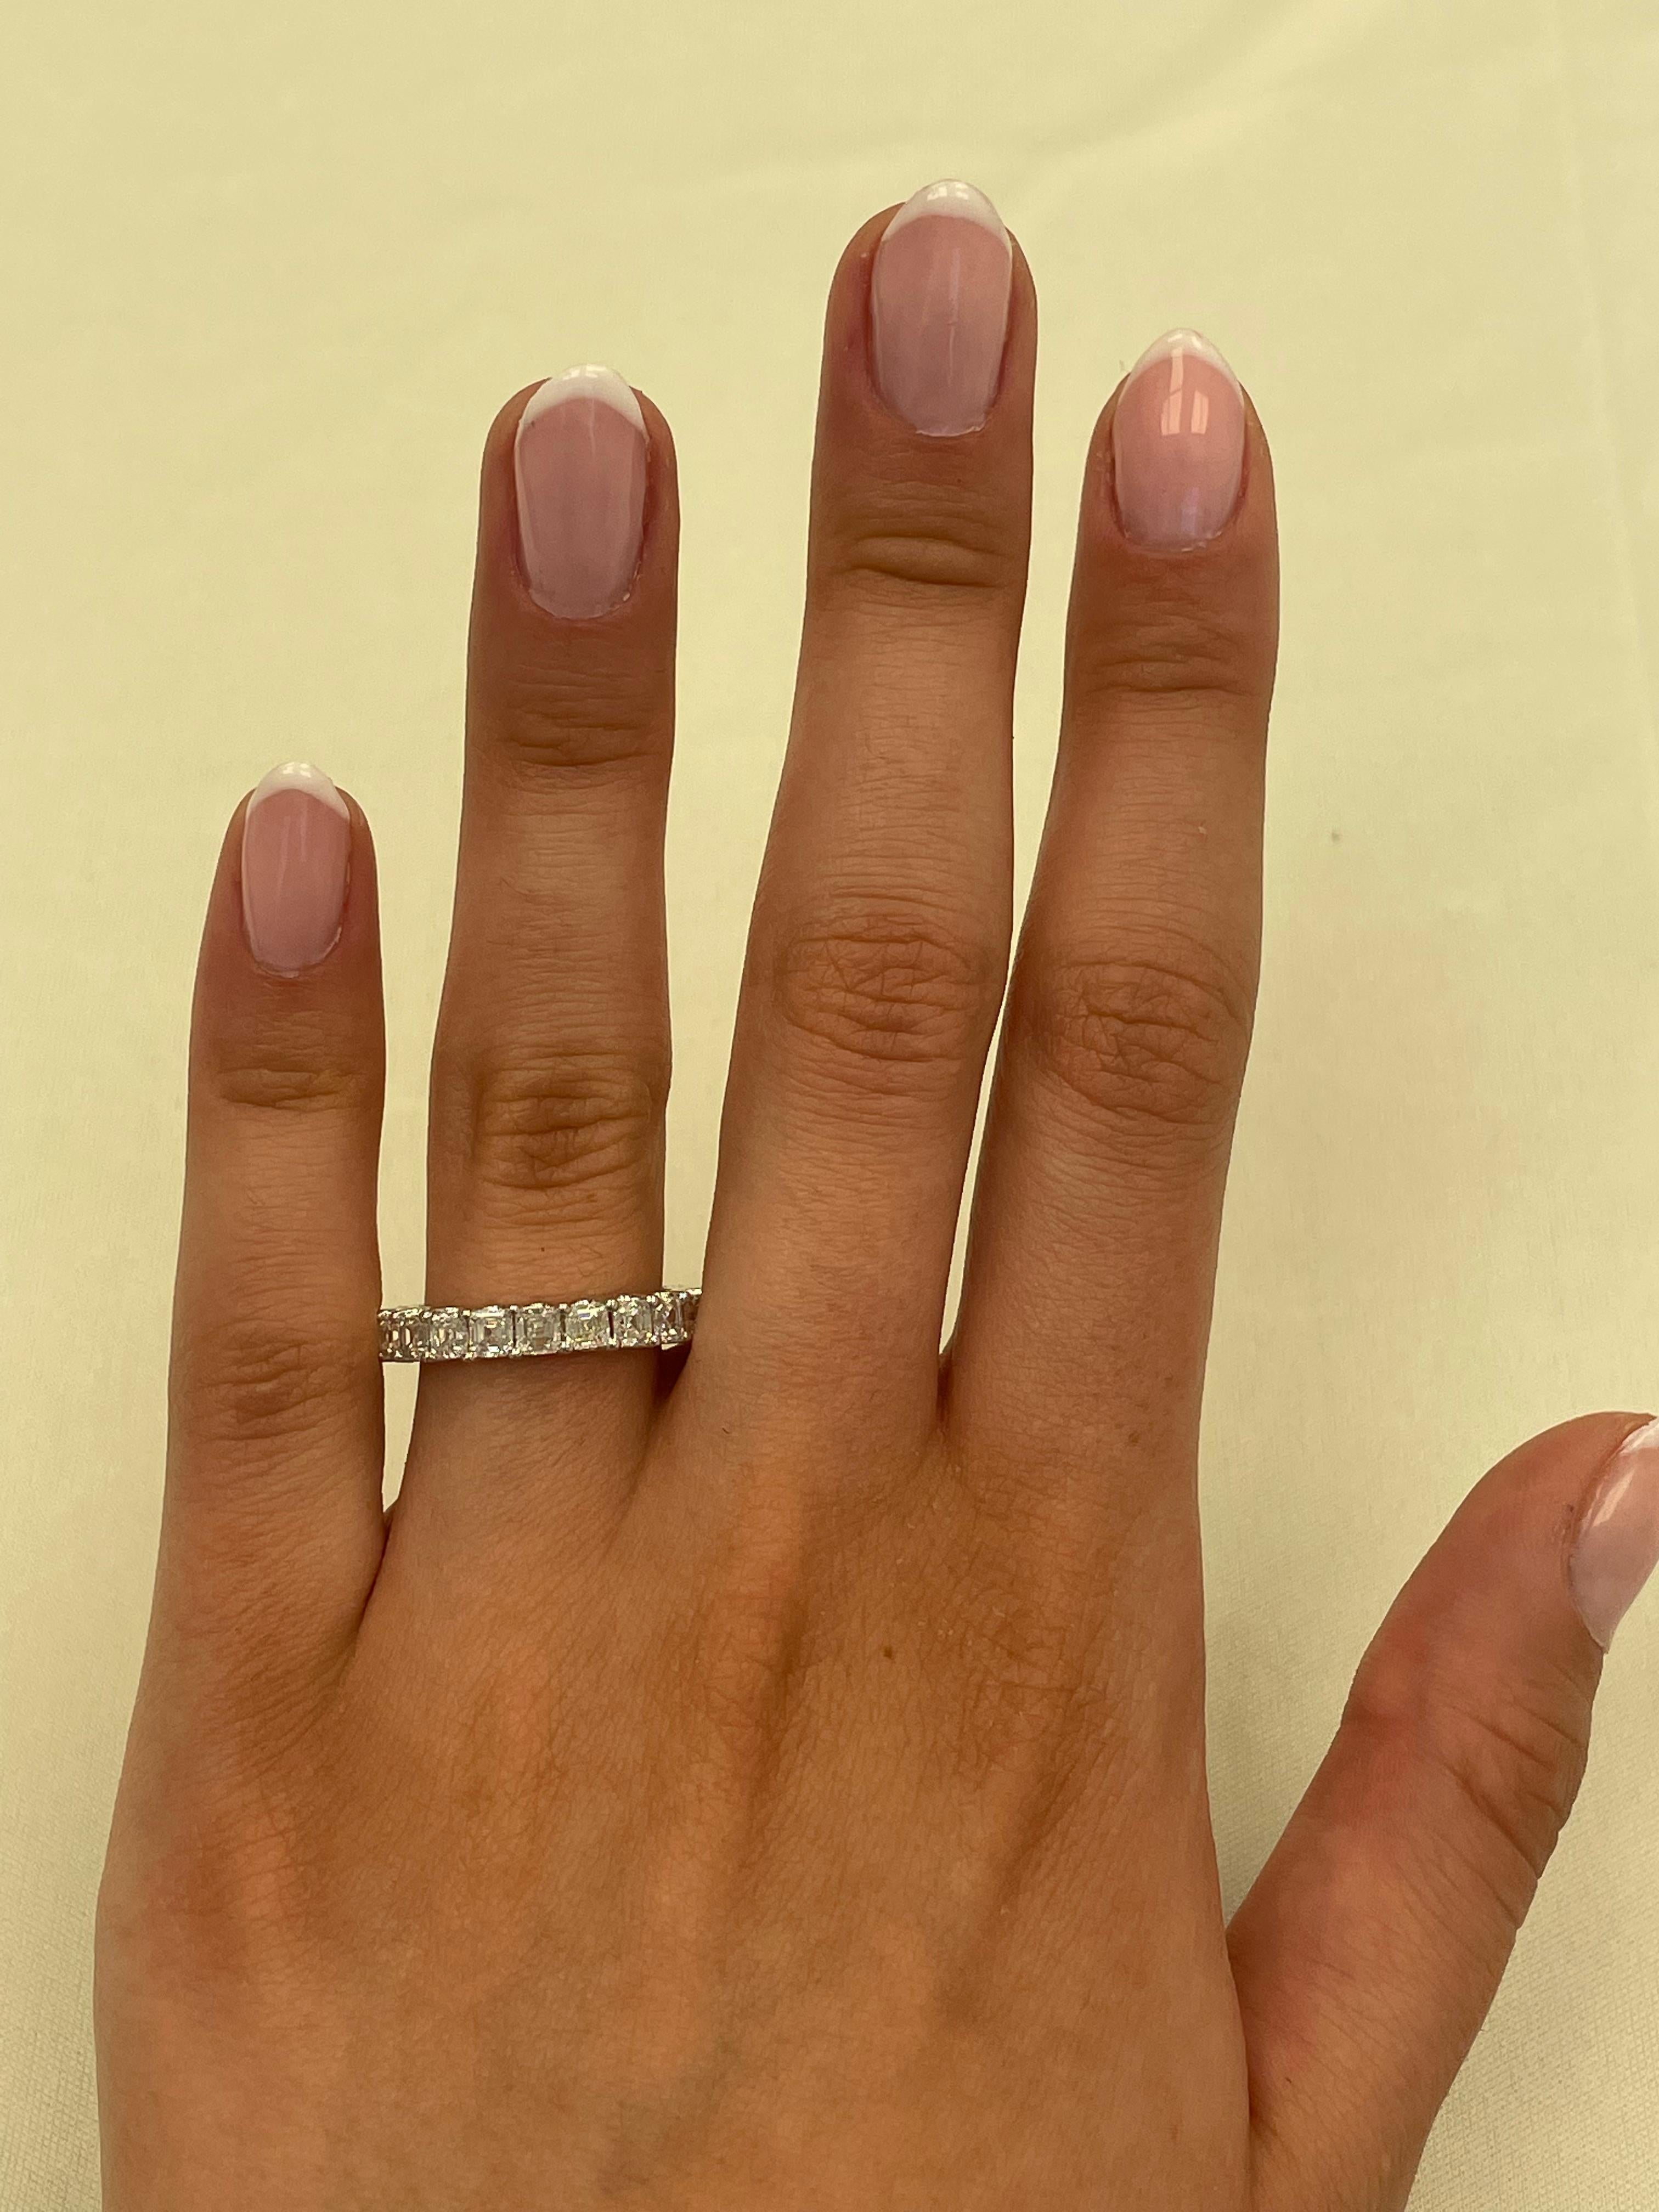 Stunning asscher cut diamond eternity band, By Alexander Beverly Hills.
22 asscher cut diamonds, 3.39 carats. D/E color and VVS clarity. 18-karat white gold, 4.00 grams, size 7. 
Accommodated with an up-to-date appraisal by a GIA G.G. once